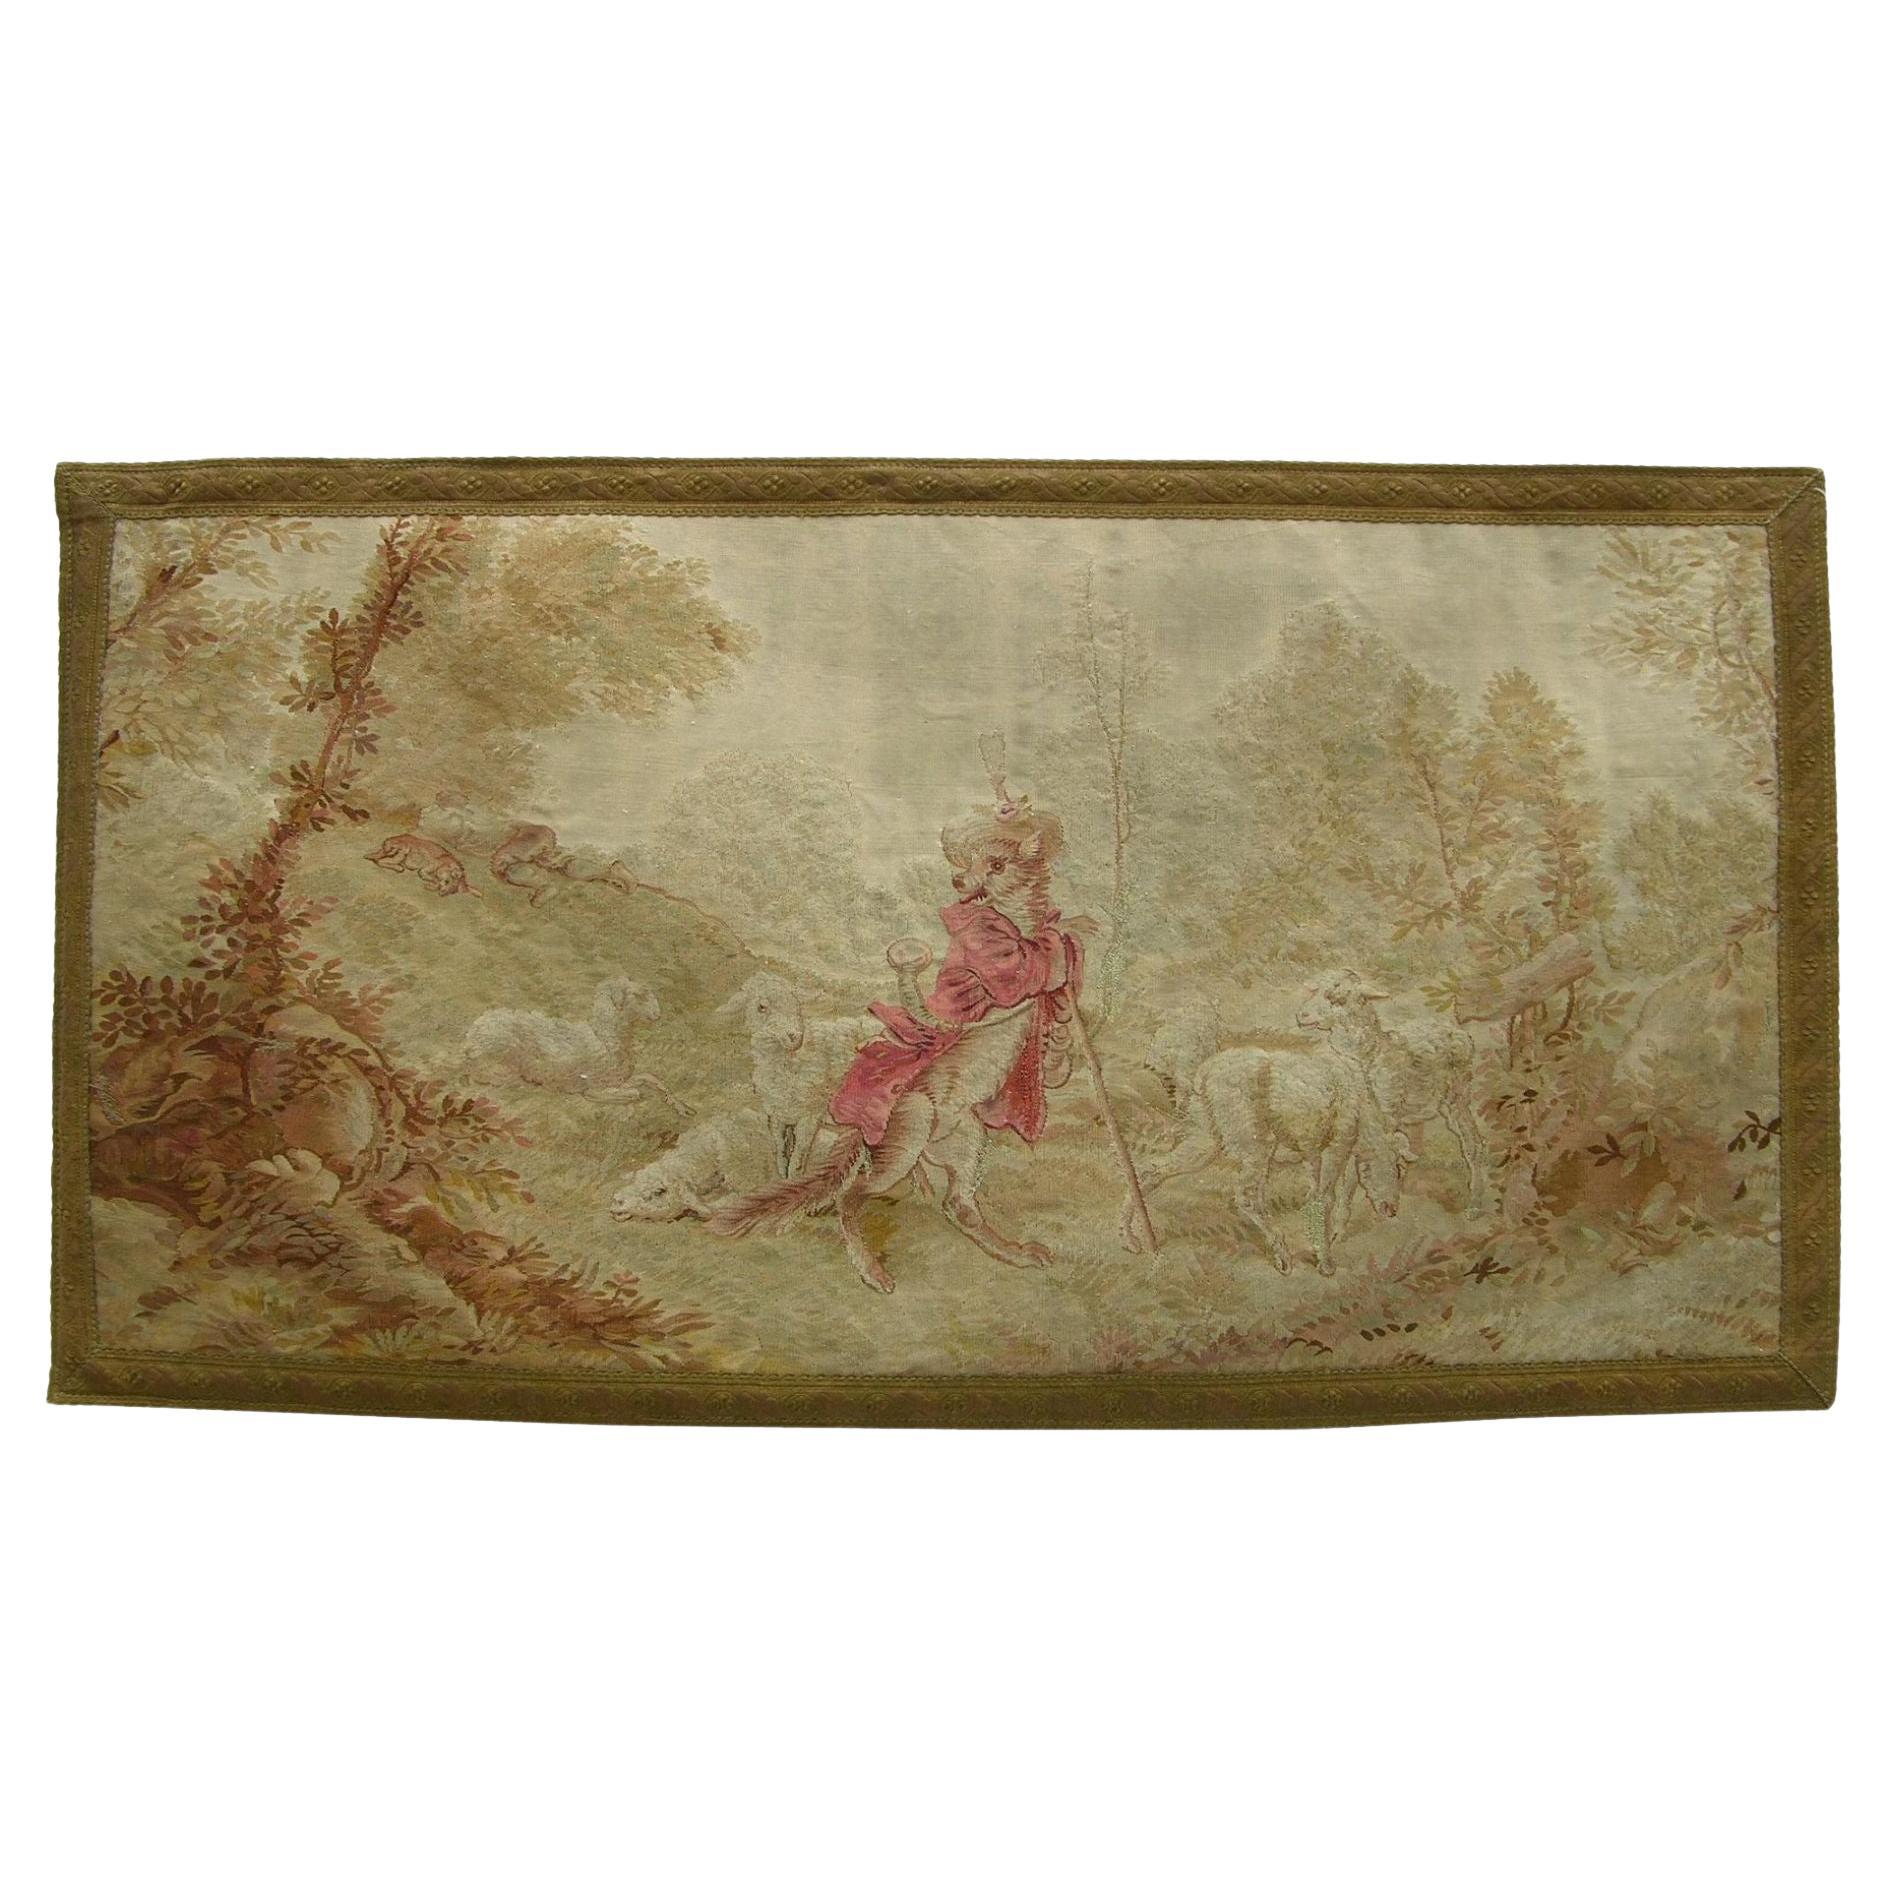 1900 Antique French Aubusson Tapestry 1'11" X 3'8" For Sale